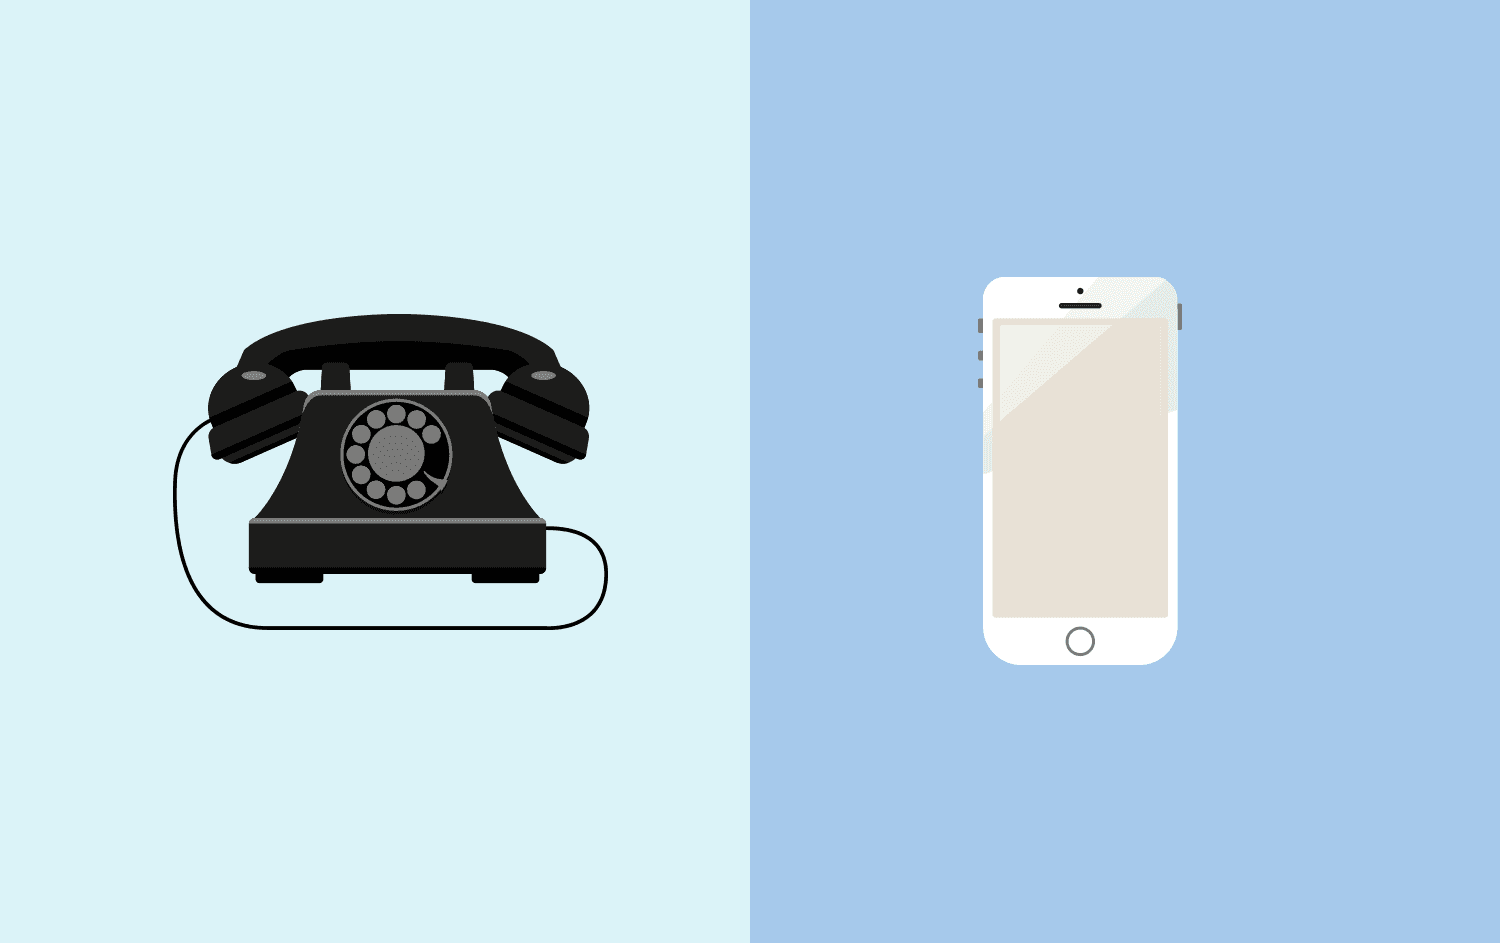 Cartoon representation with split screen of old-fashioned phone and a modern smartphone